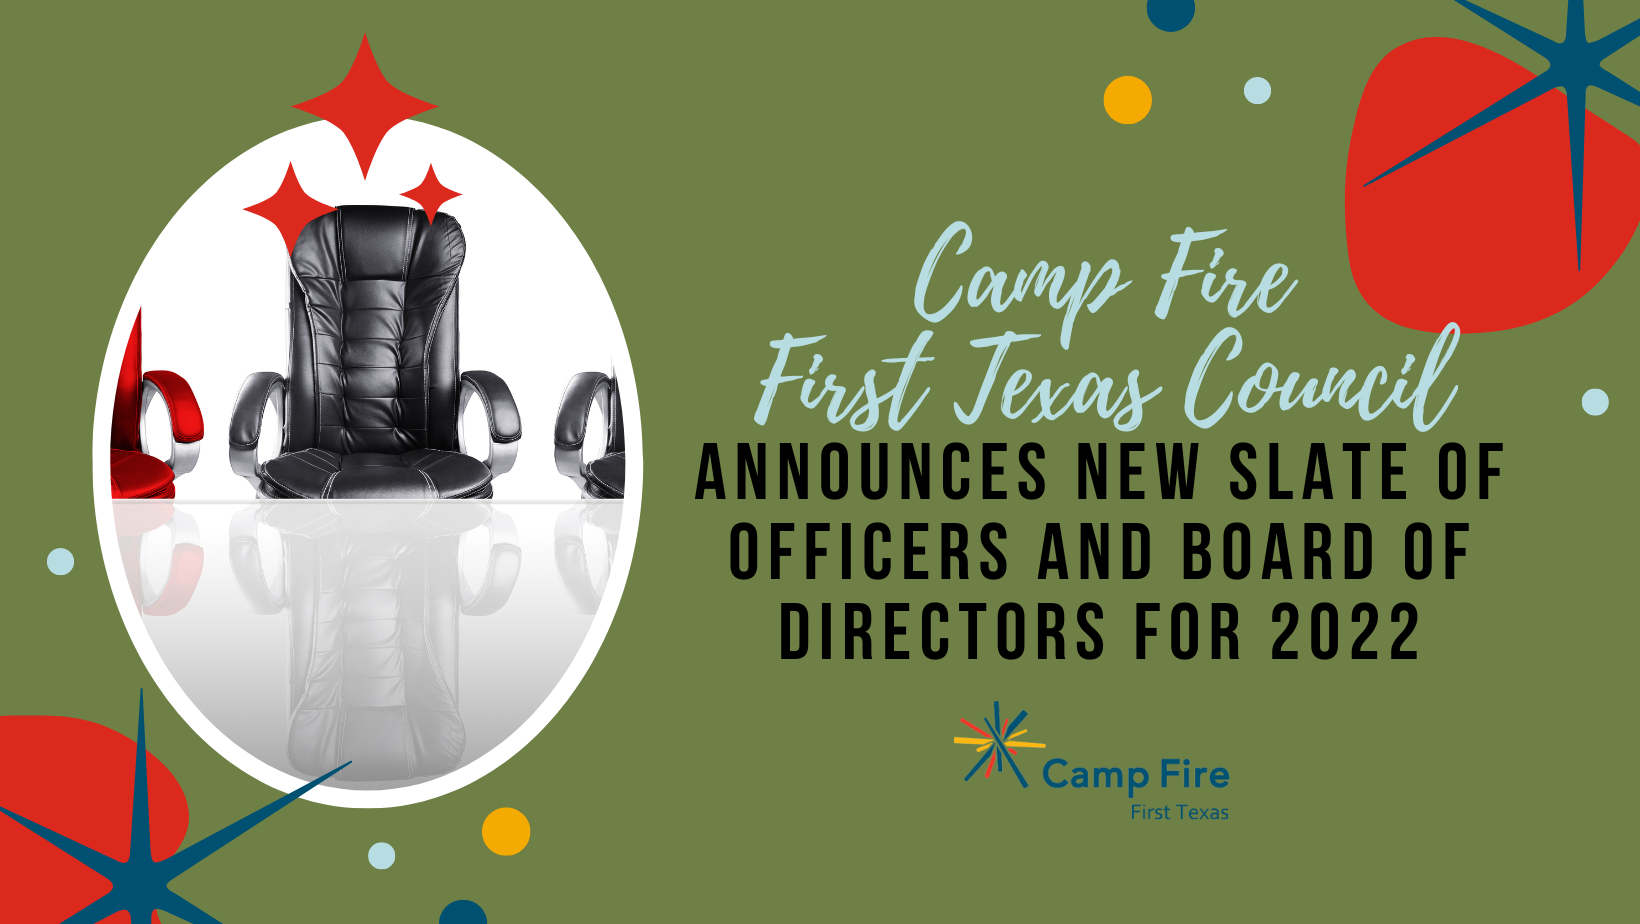 Camp Fire First Texas Council Announces New Slate of Officers and Board of Directors for 2022; Presents Chairman’s Award, a Camp Fire First Texas blog